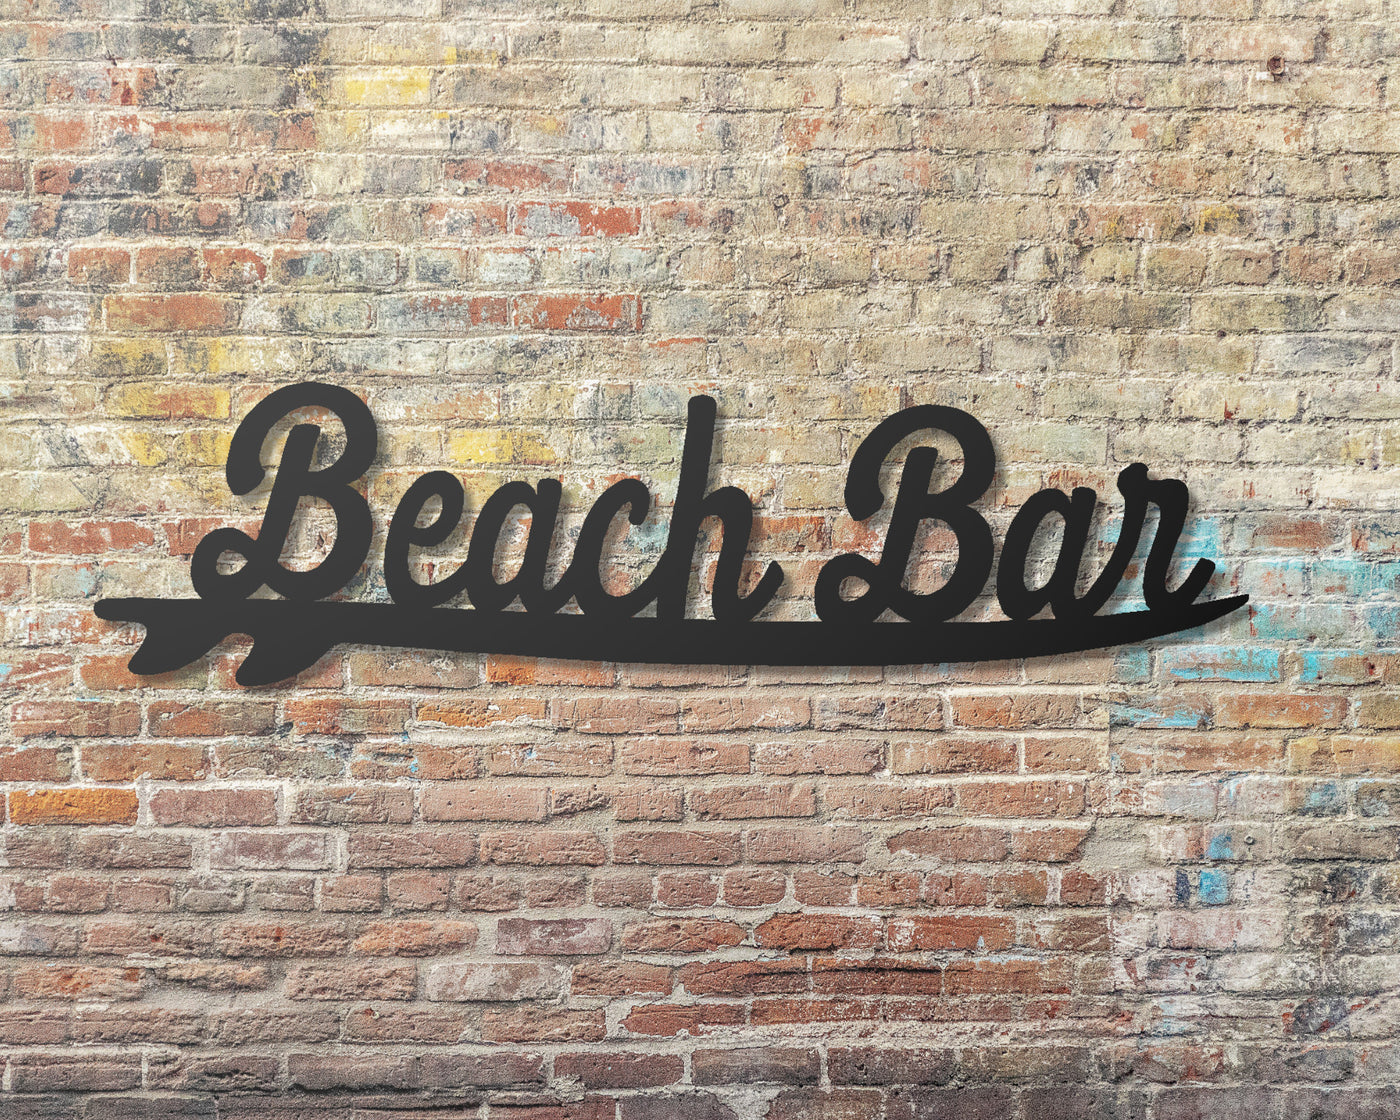 Beach Bar Metal Word Sign - Madison Iron and Wood - Metal Word Art - metal outdoor decor - Steel deocrations - american made products - veteran owned business products - fencing decorations - fencing supplies - custom wall decorations - personalized wall signs - steel - decorative post caps - steel post caps - metal post caps - brackets - structural brackets - home improvement - easter - easter decorations - easter gift - easter yard decor